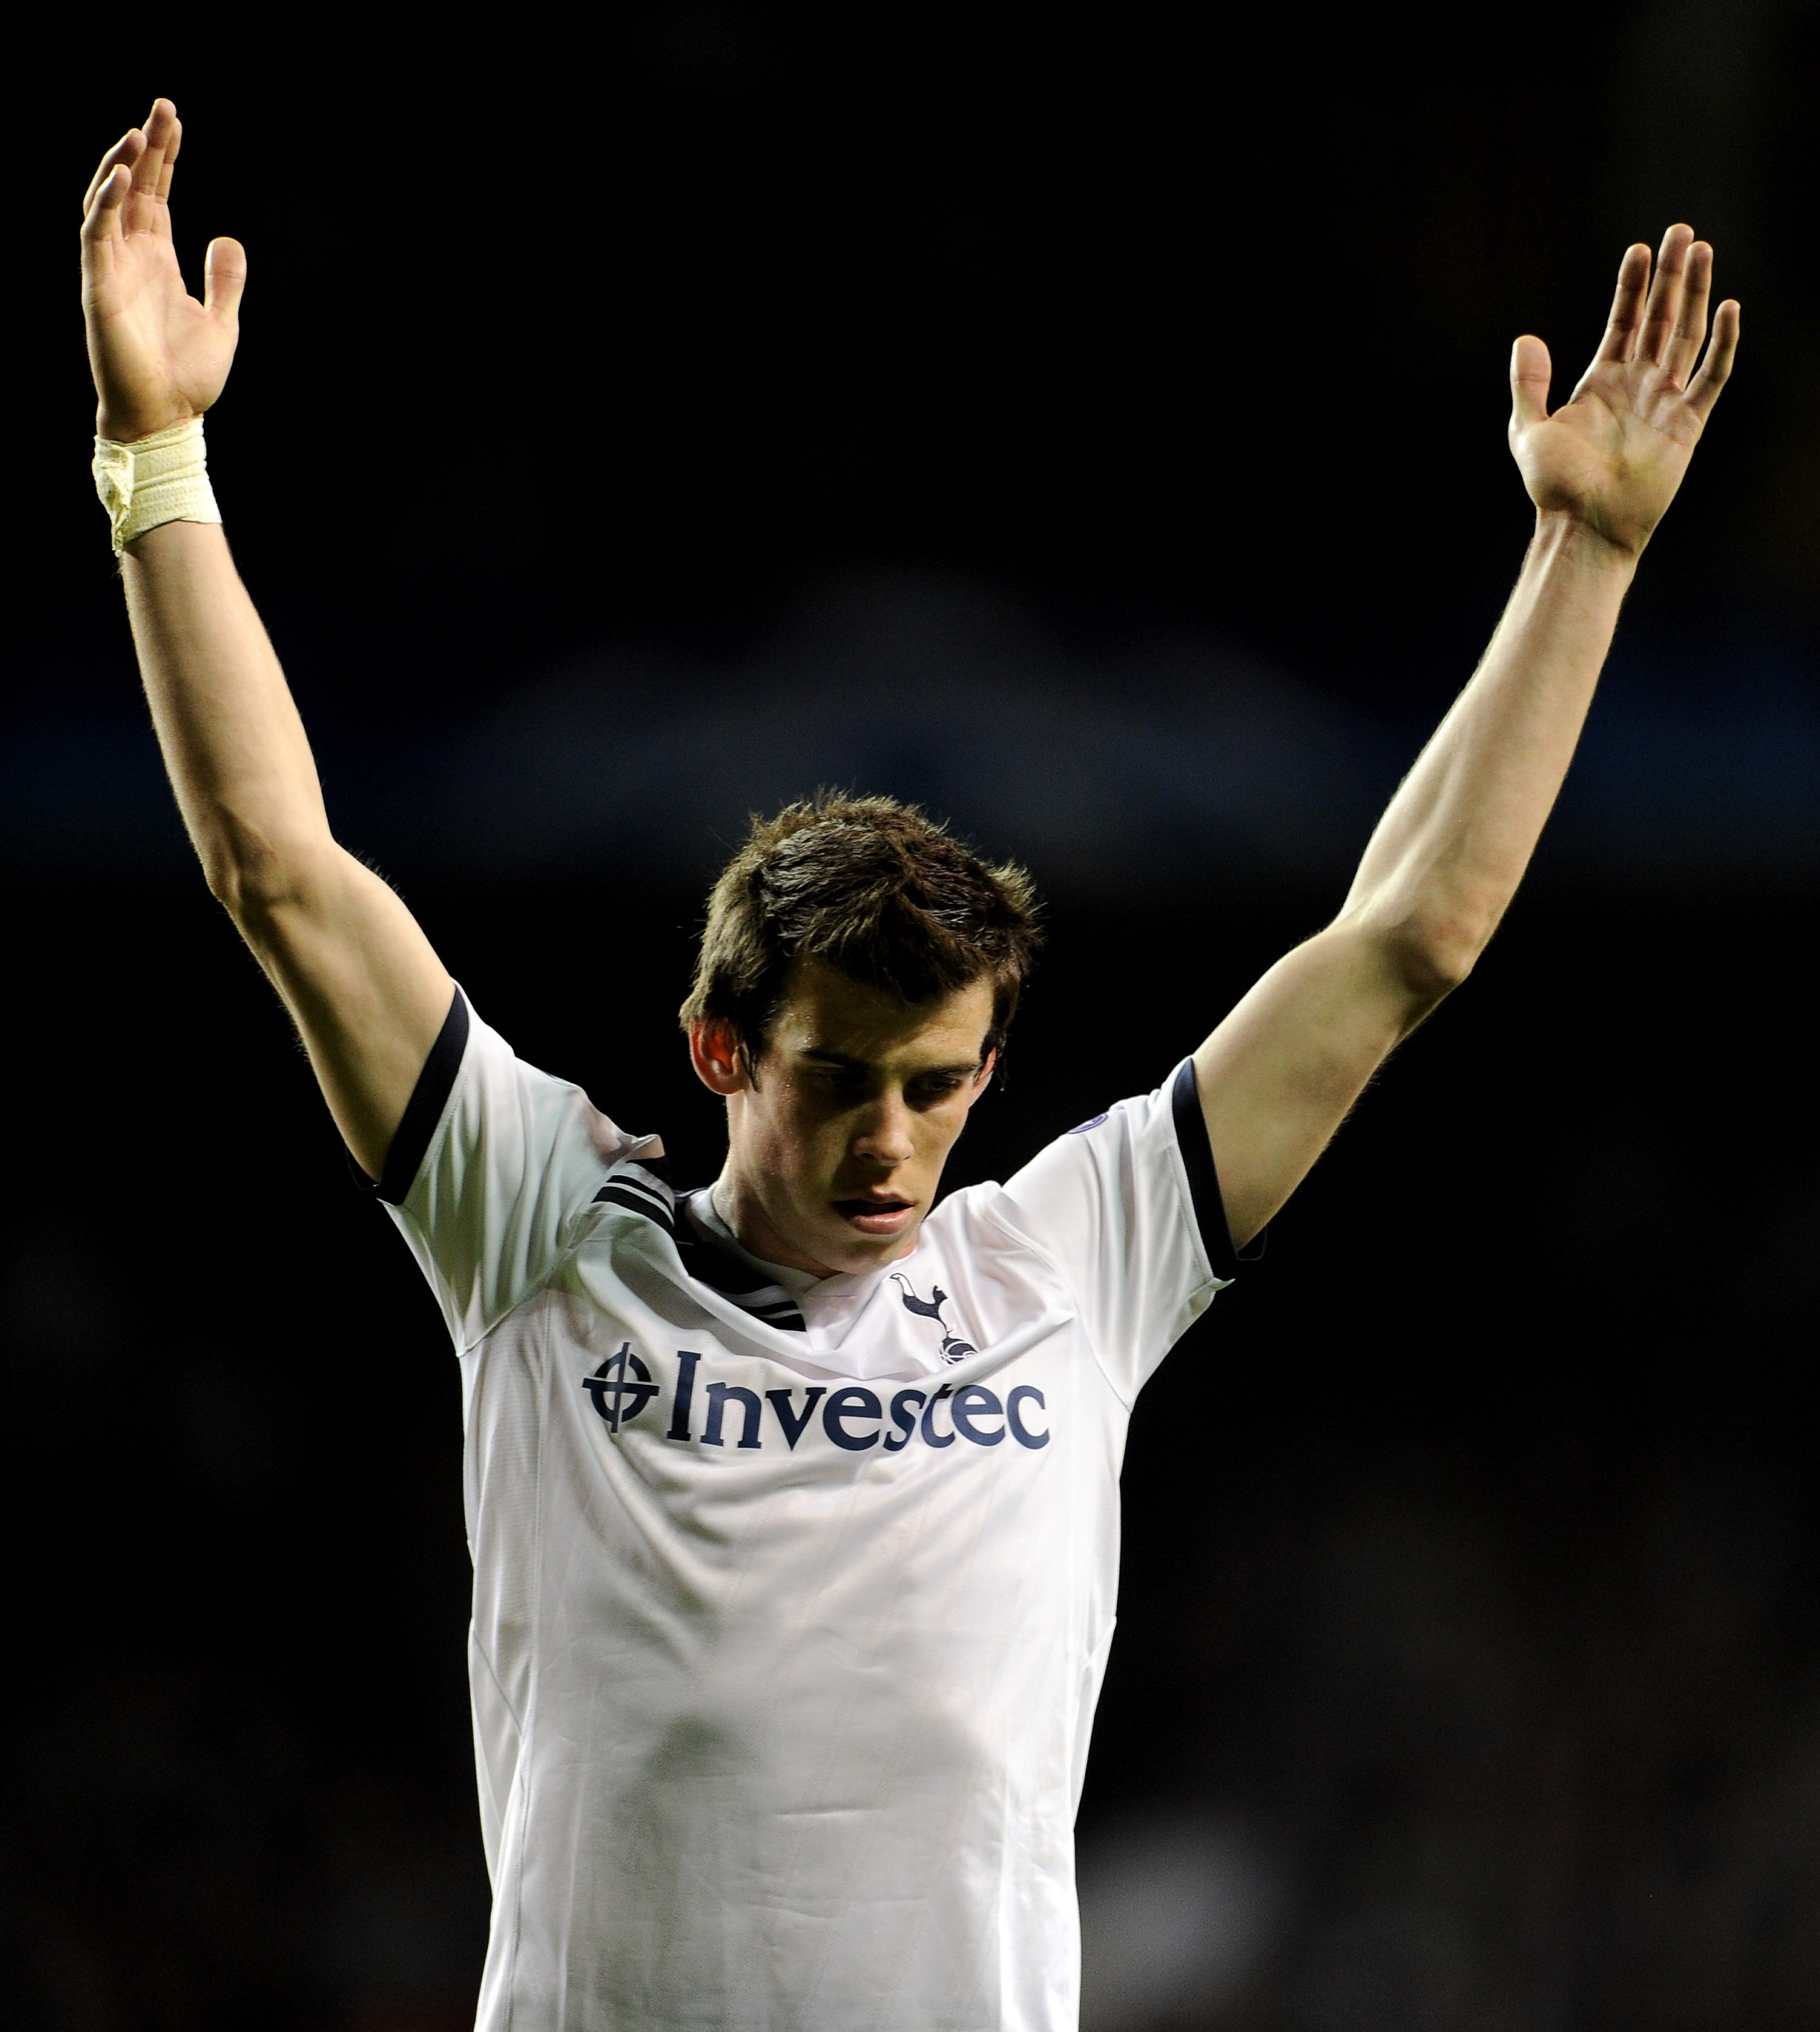 LONDON, ENGLAND - APRIL 13:  Gareth Bale of Spurs shows his dejection during the UEFA Champions League quarter final second leg match between Tottenham Hotspur and Real Madrid at White Hart Lane on April 13, 2011 in London, England.  (Photo by Jasper Juin